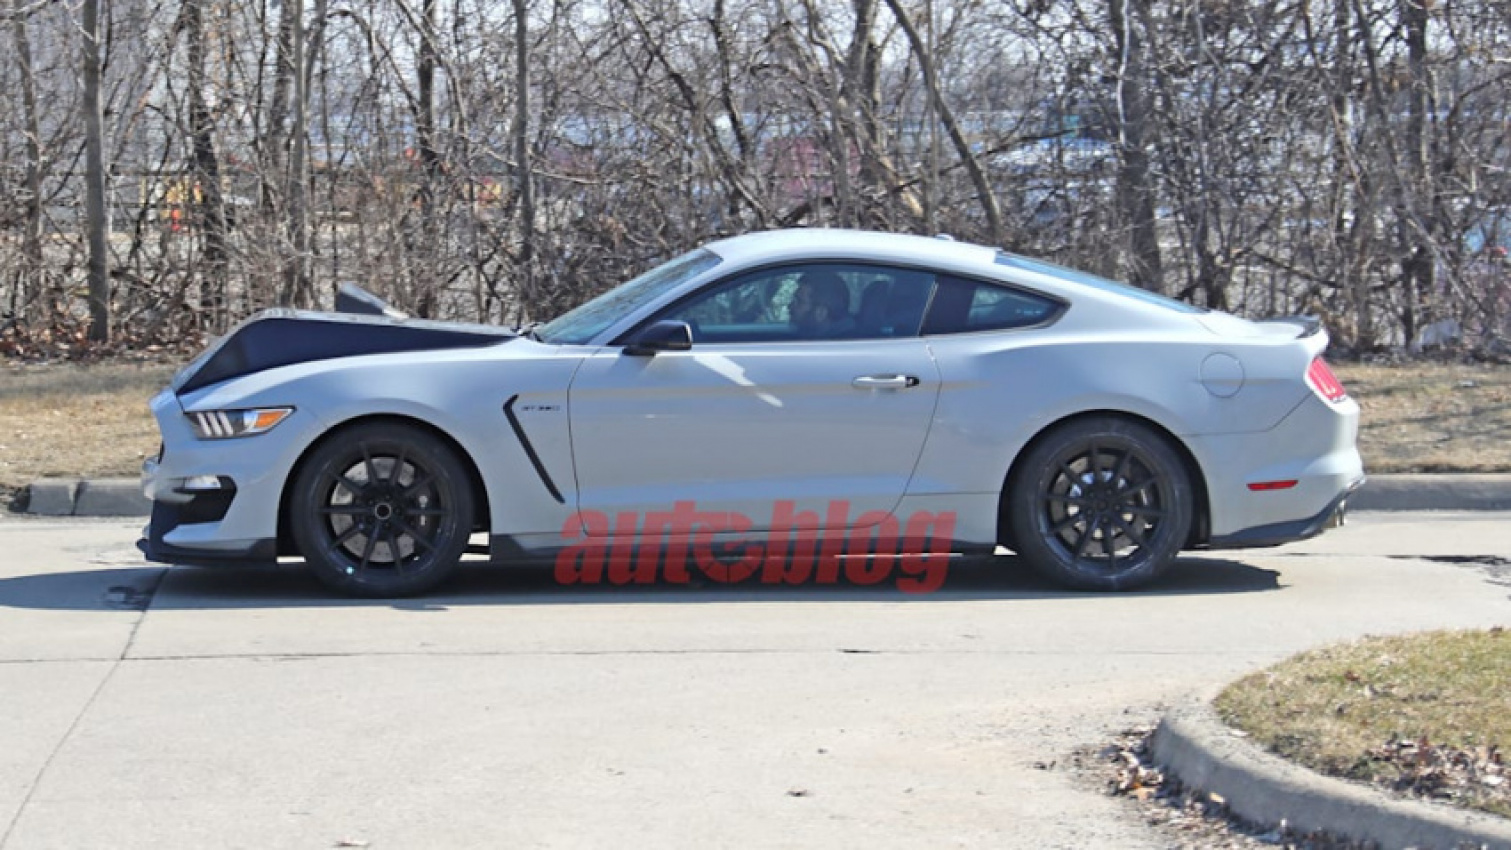 autos, cars, ford, rumormill, shelby, ford mustang, future vehicles, performance, spy-photos, what the hell is this ford mustang shelby gt350 mule?